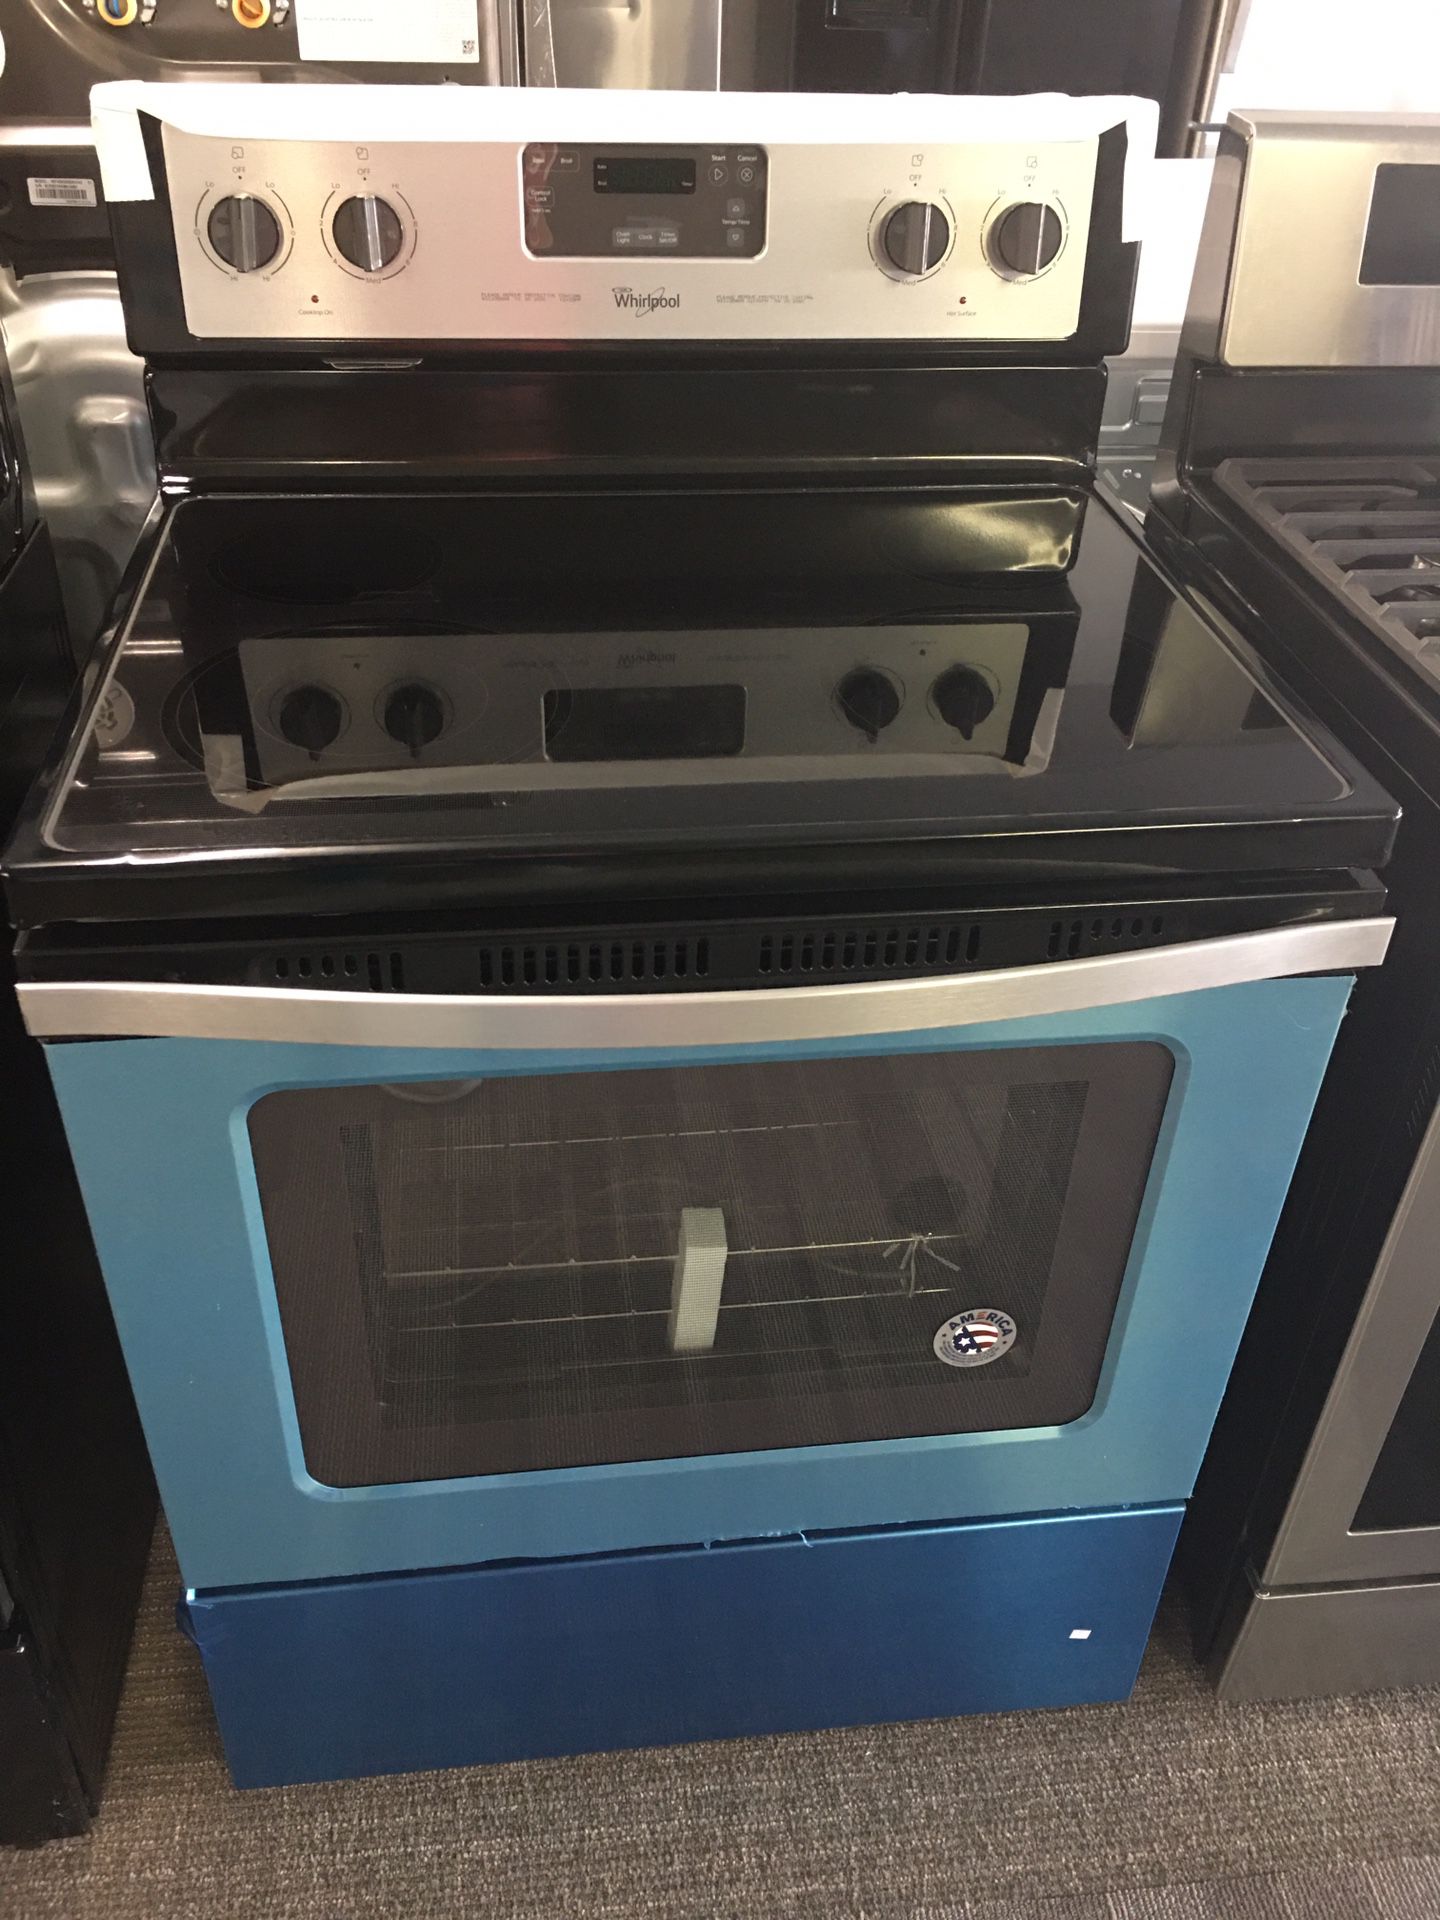 Whirlpool Stainless Steel Electric Stove With Warranty No Credit Needed Just $49 Down Payment Cash Price $799